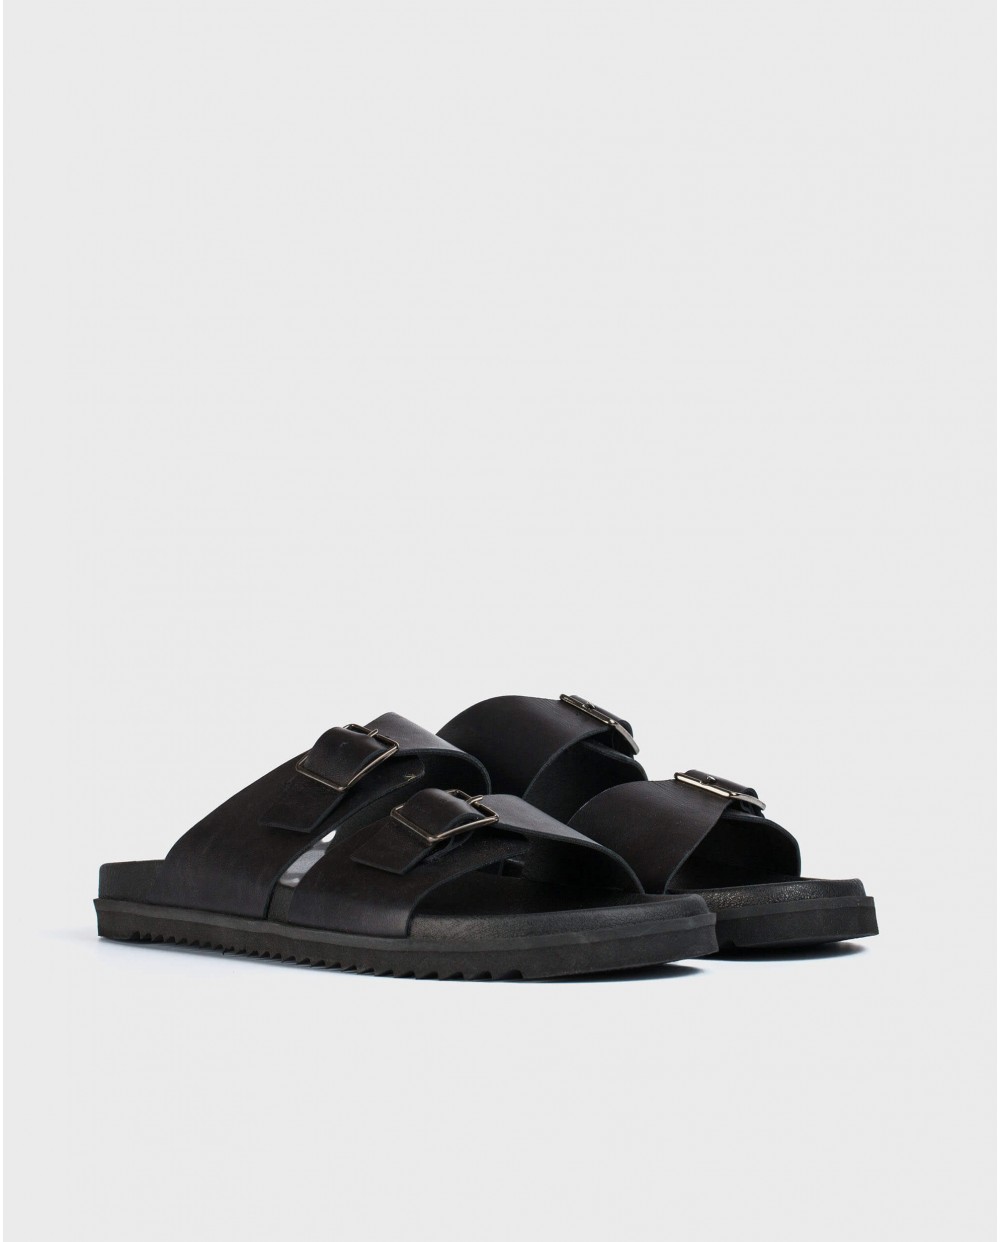 Wonders-Ready to wear-Leather sandal with buckles